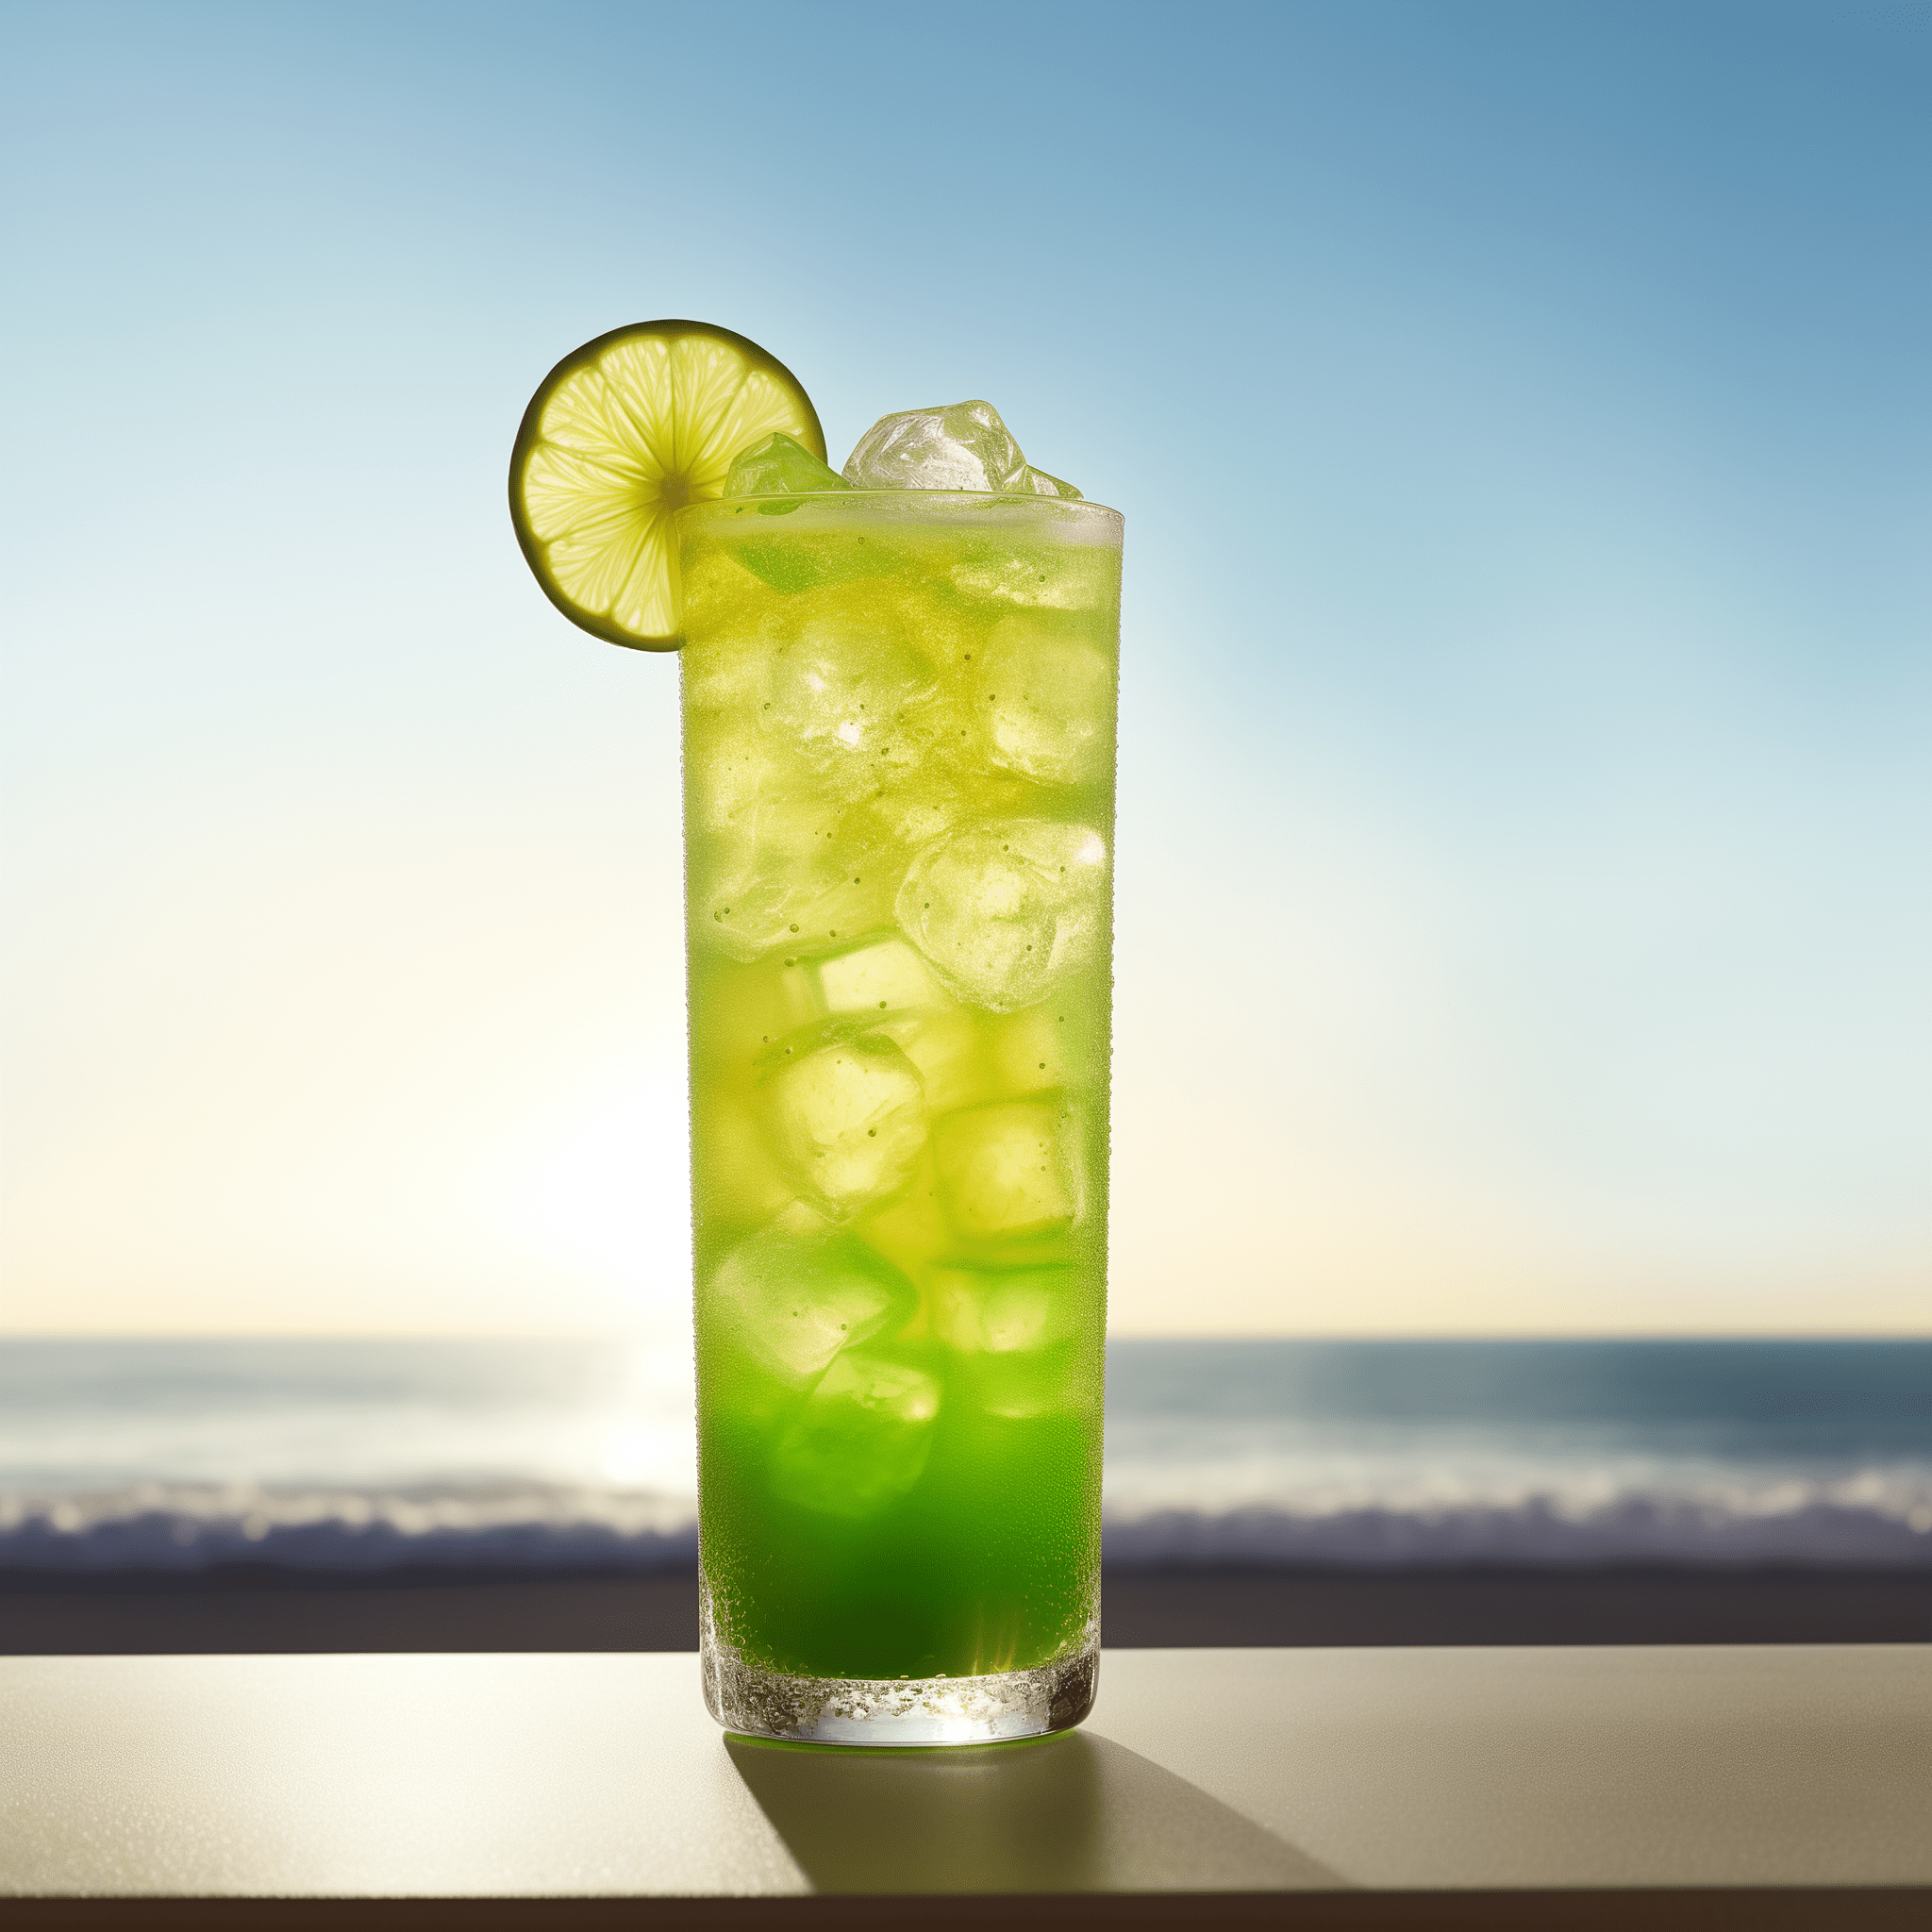 Malibu Dew Cocktail Recipe - The Malibu Dew is a sweet, refreshing cocktail with a tropical coconut flavor that's balanced by the tangy citrus of Mountain Dew. It's light on the palate with a playful fizziness.